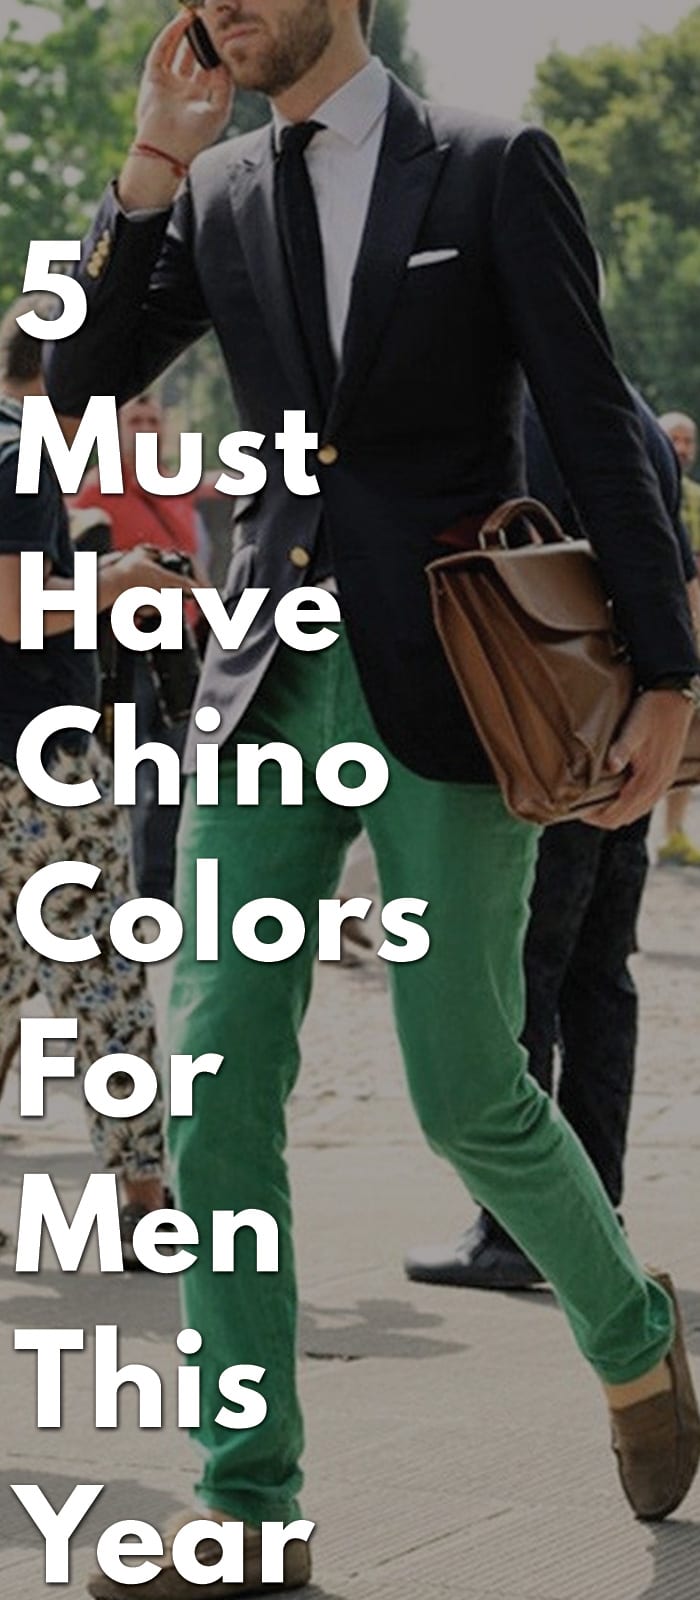 5-Must-have-Chino-Colors-for-Men-This-Year